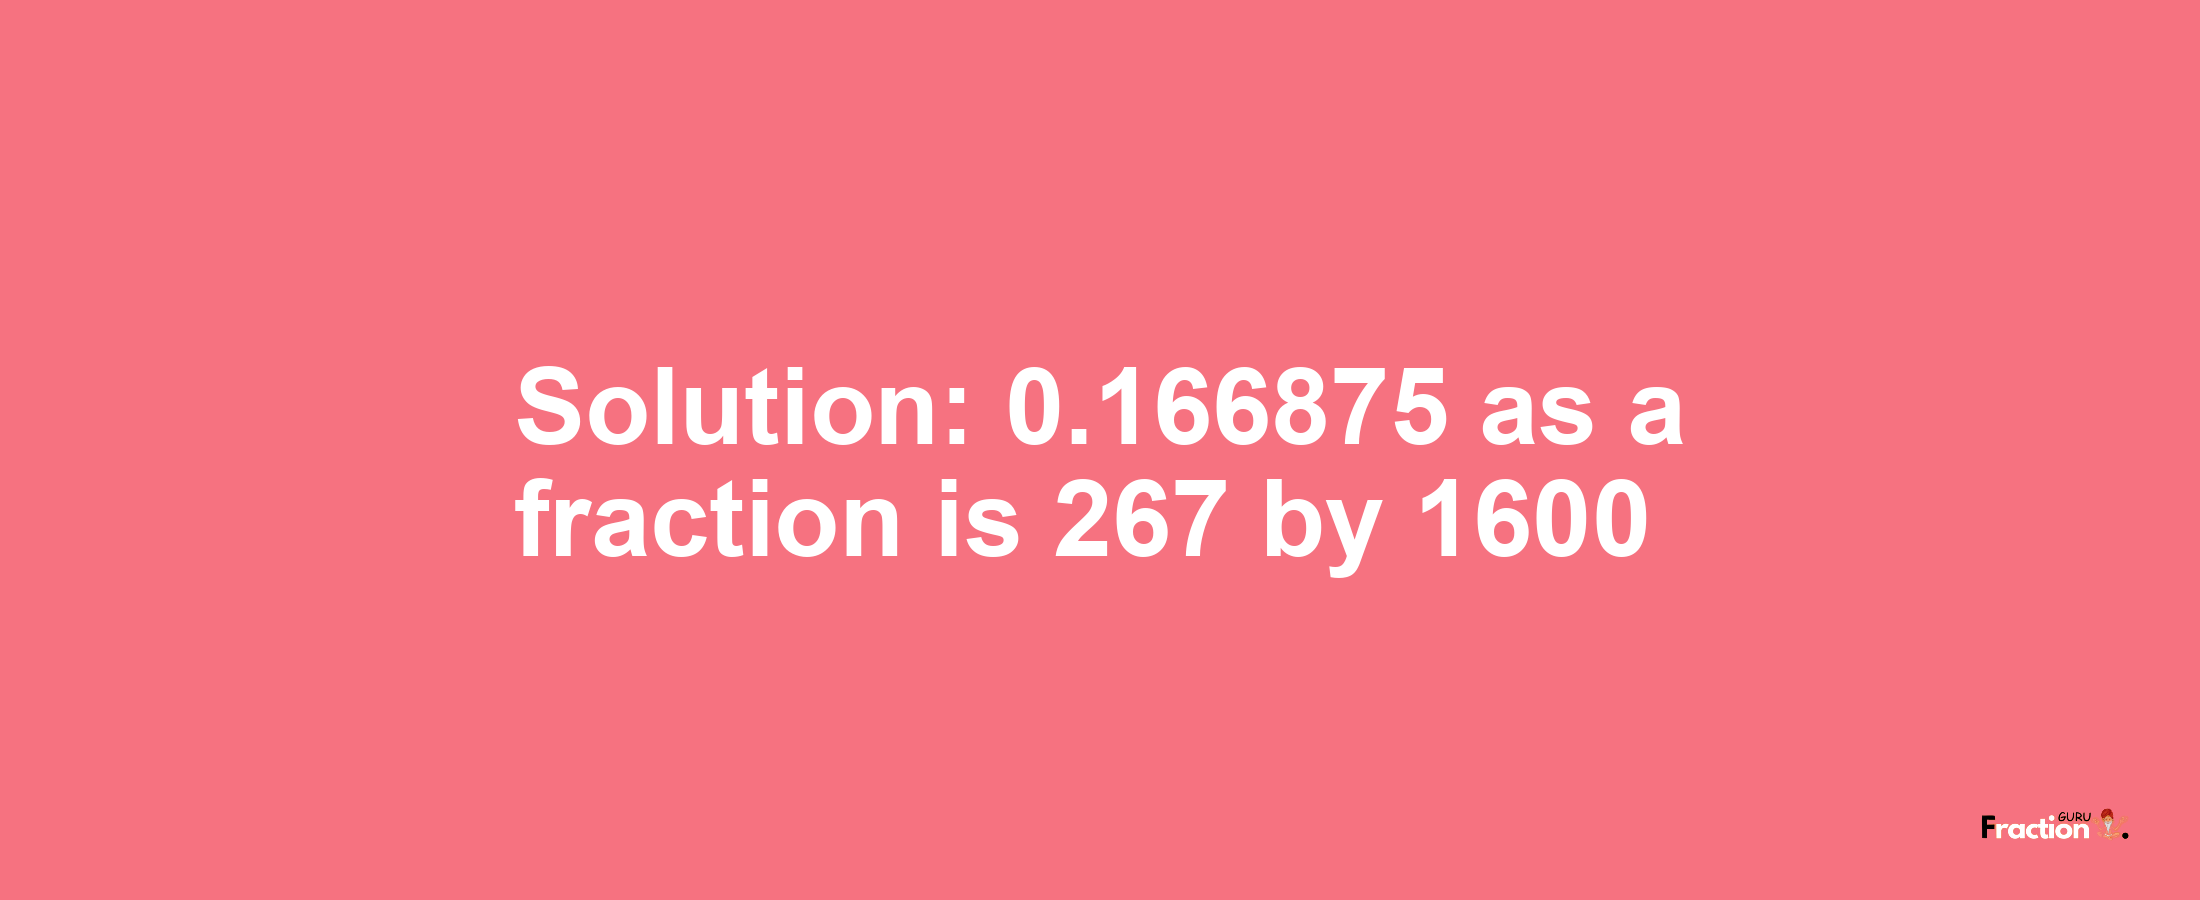 Solution:0.166875 as a fraction is 267/1600